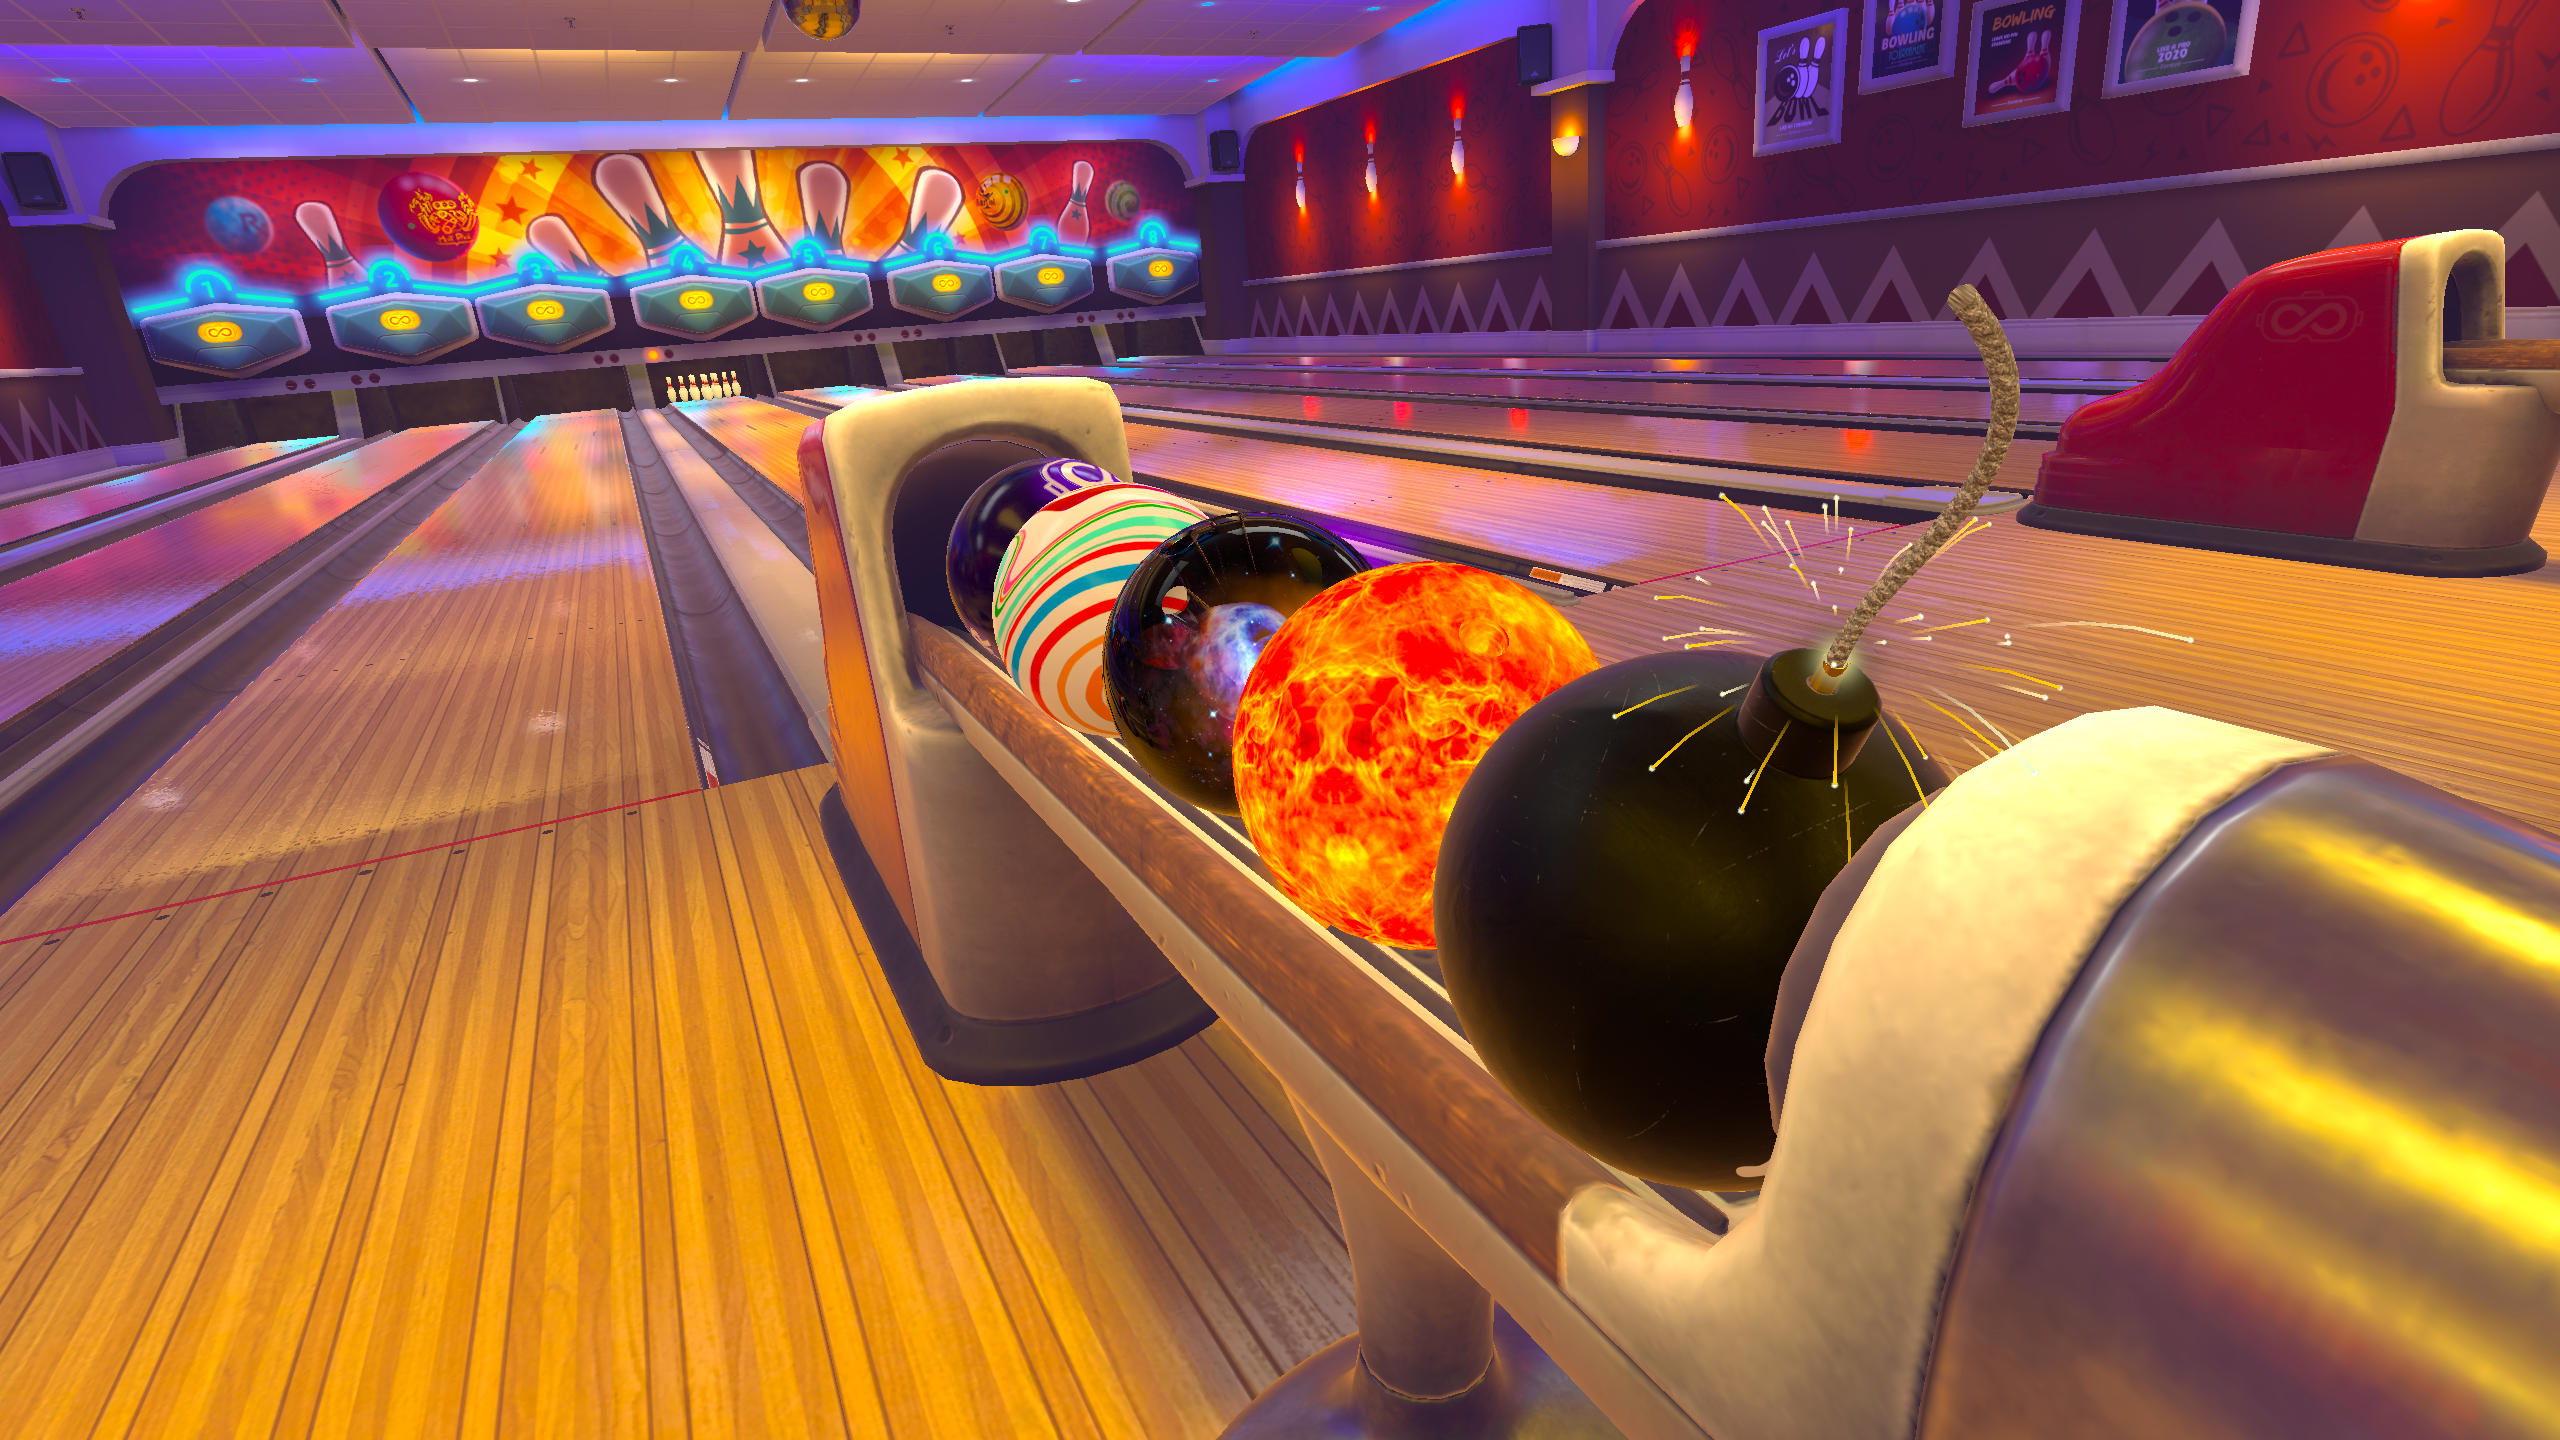 This VR Game Made Me Finally Enjoy Bowling